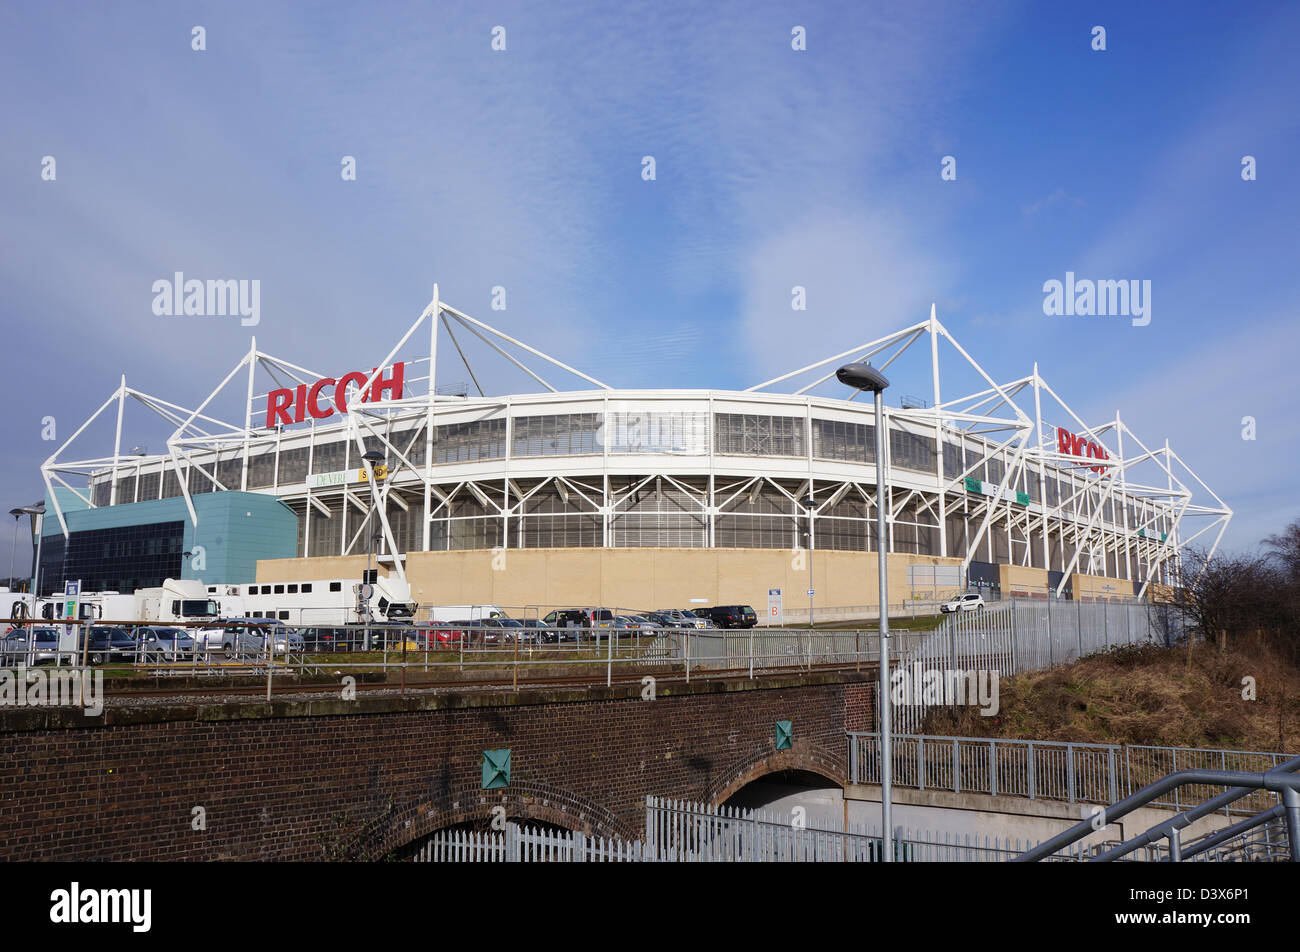 20,000 Ricoh arena Stock Pictures, Editorial Images and Stock Photos